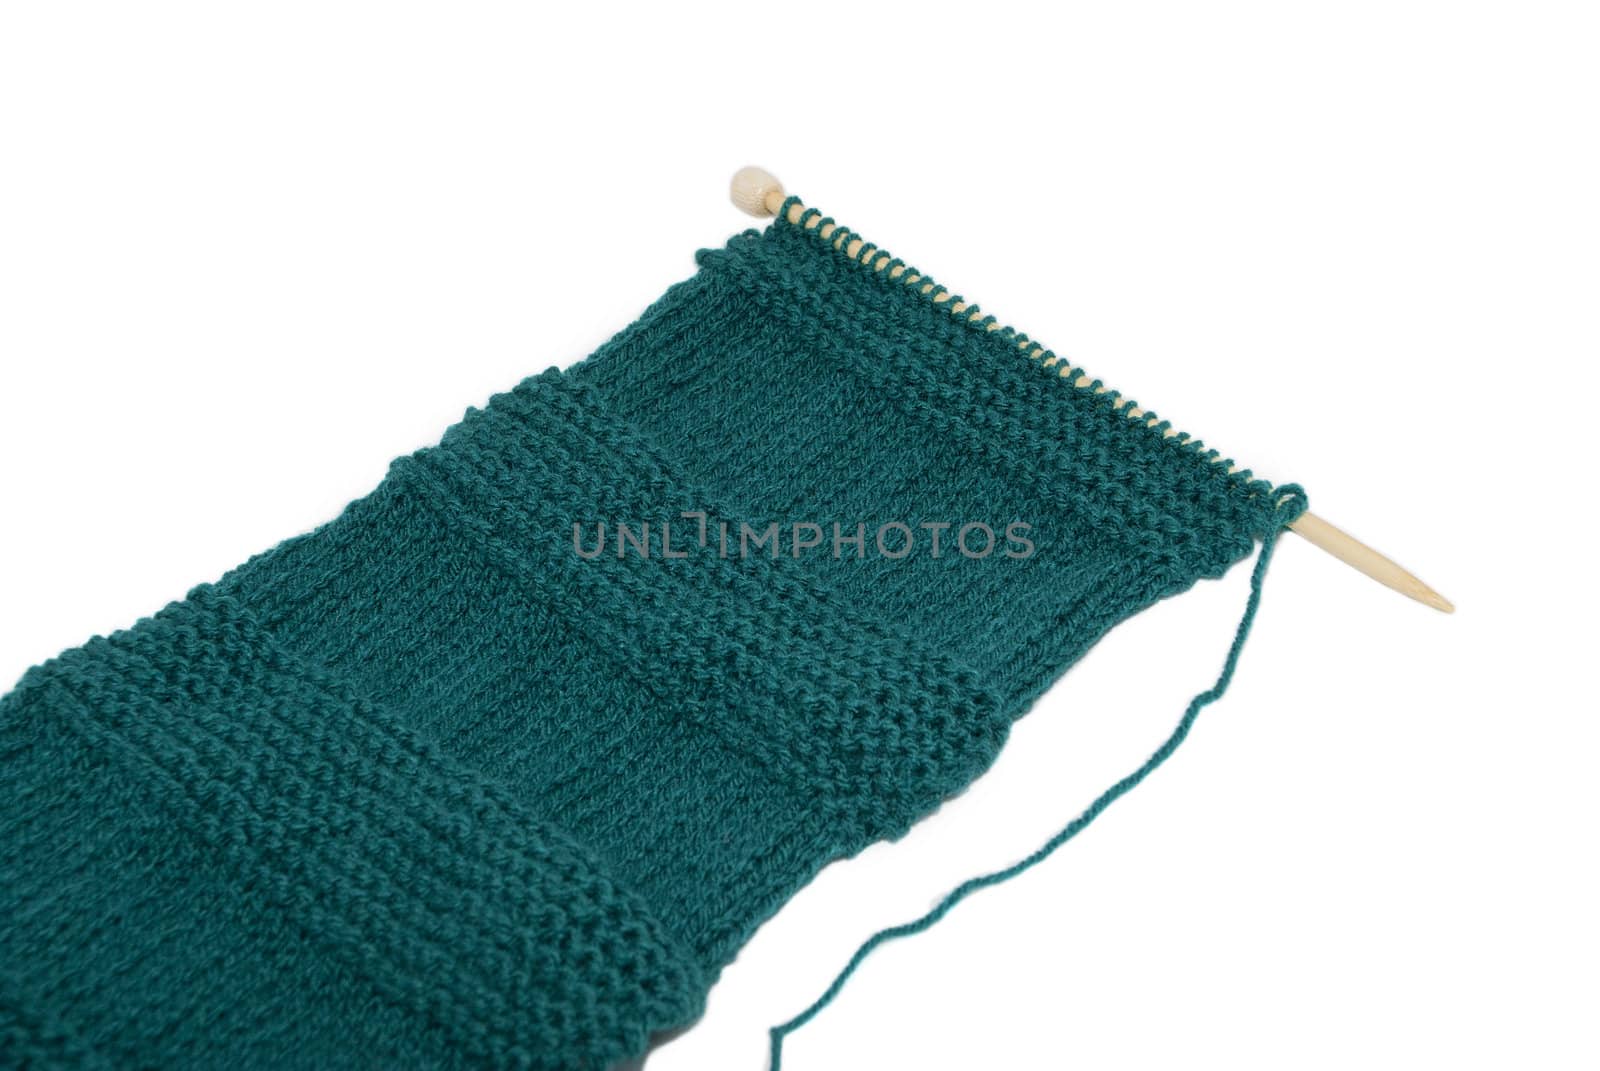 Unfinished scarf on knitting needle in stocking and garter stitch